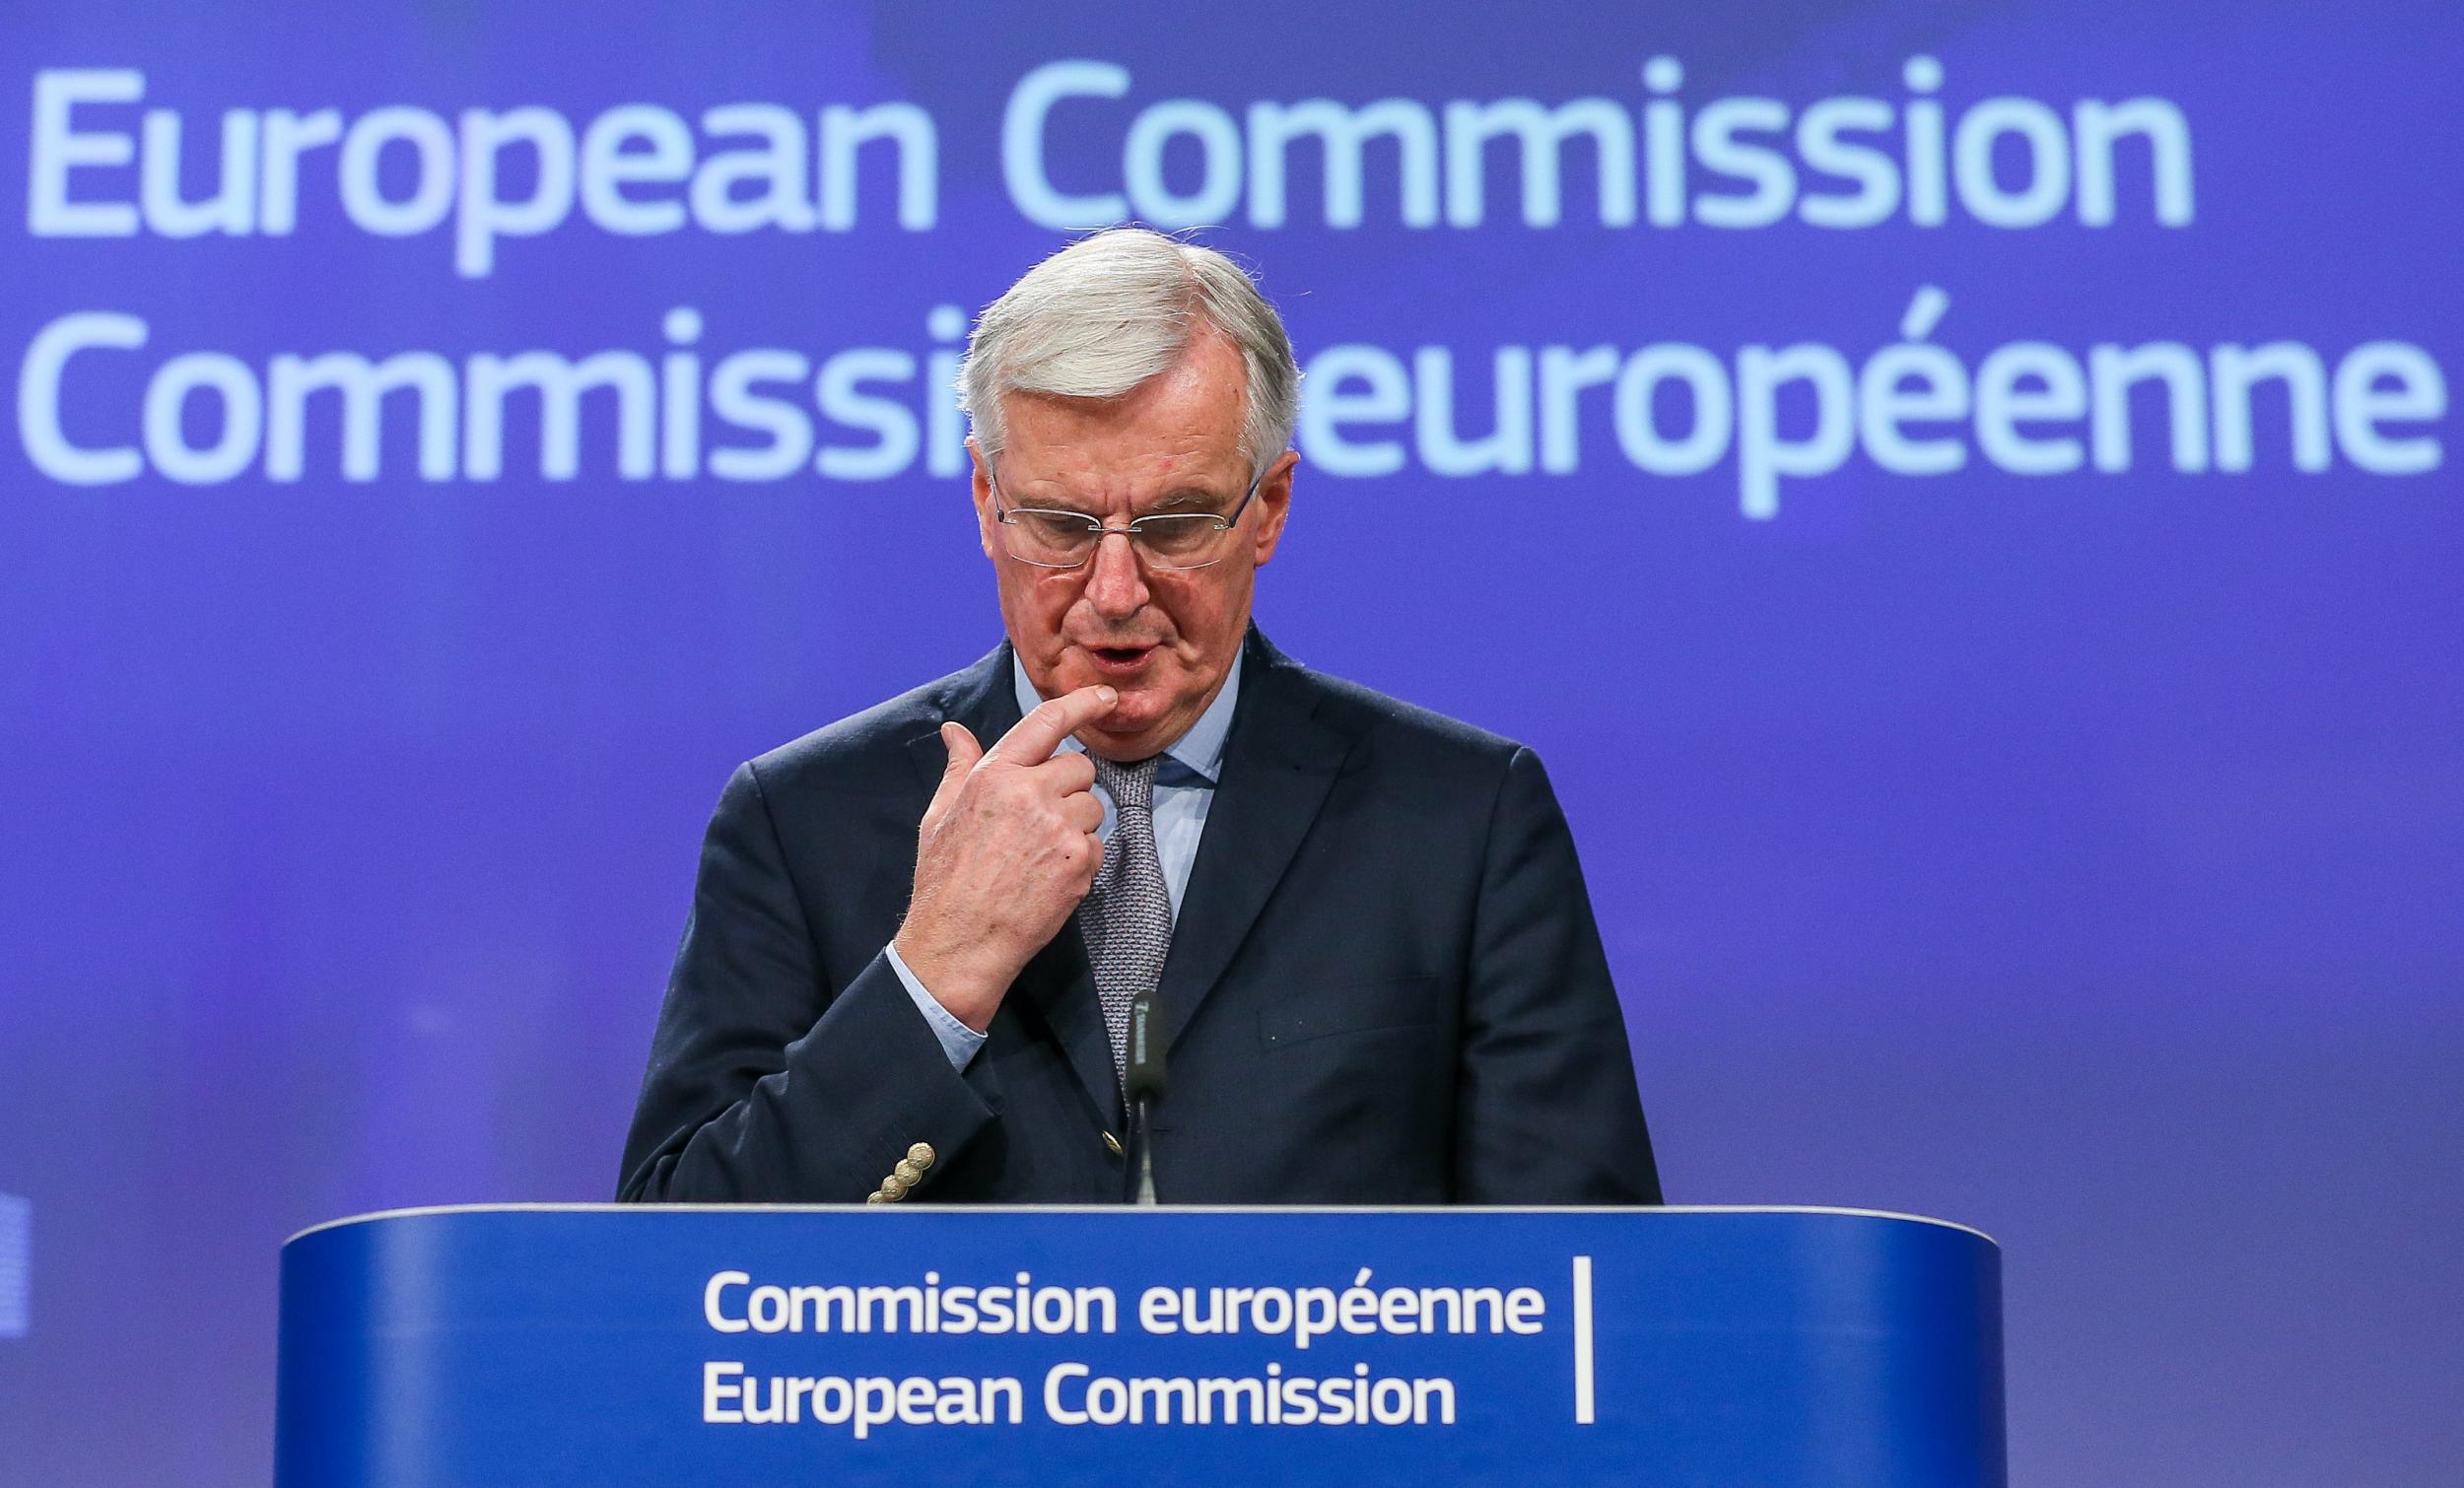 Michel Barnier has been told the transition process must end by 31 December 2020